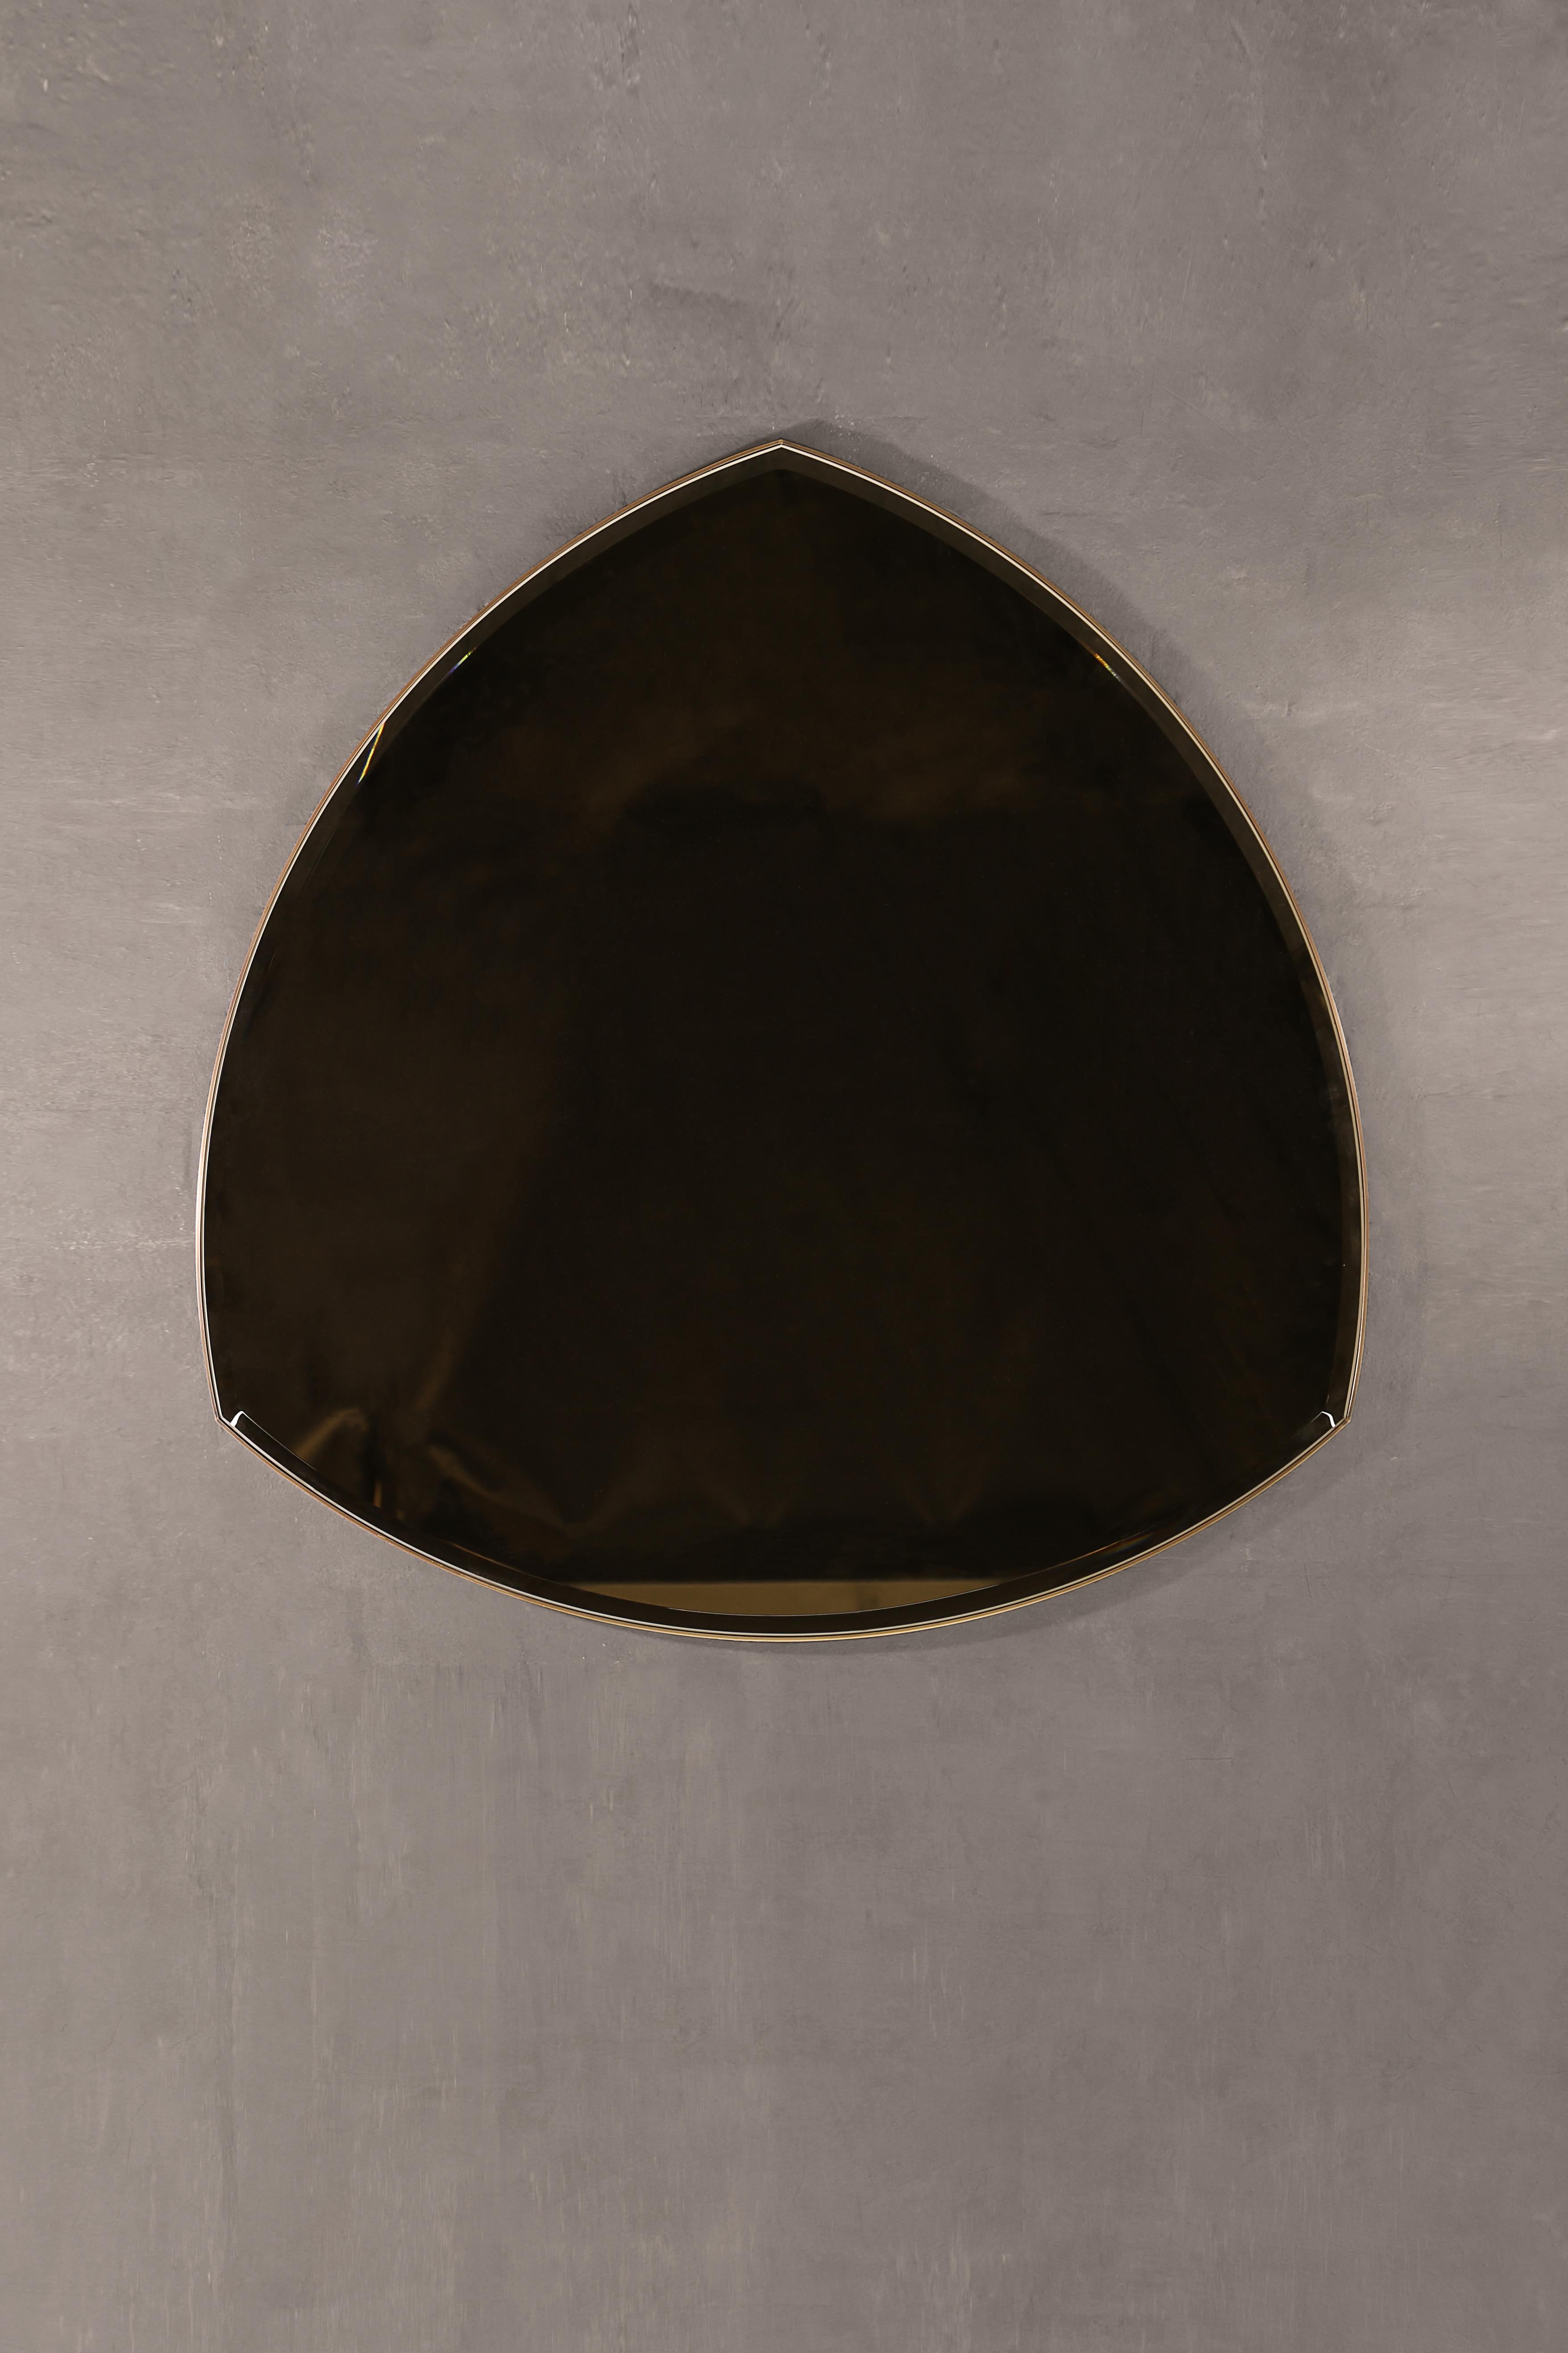 Jarrow Wall Mirror — Blackened Steel — Handmade in Britain — Large In New Condition For Sale In Washington, GB